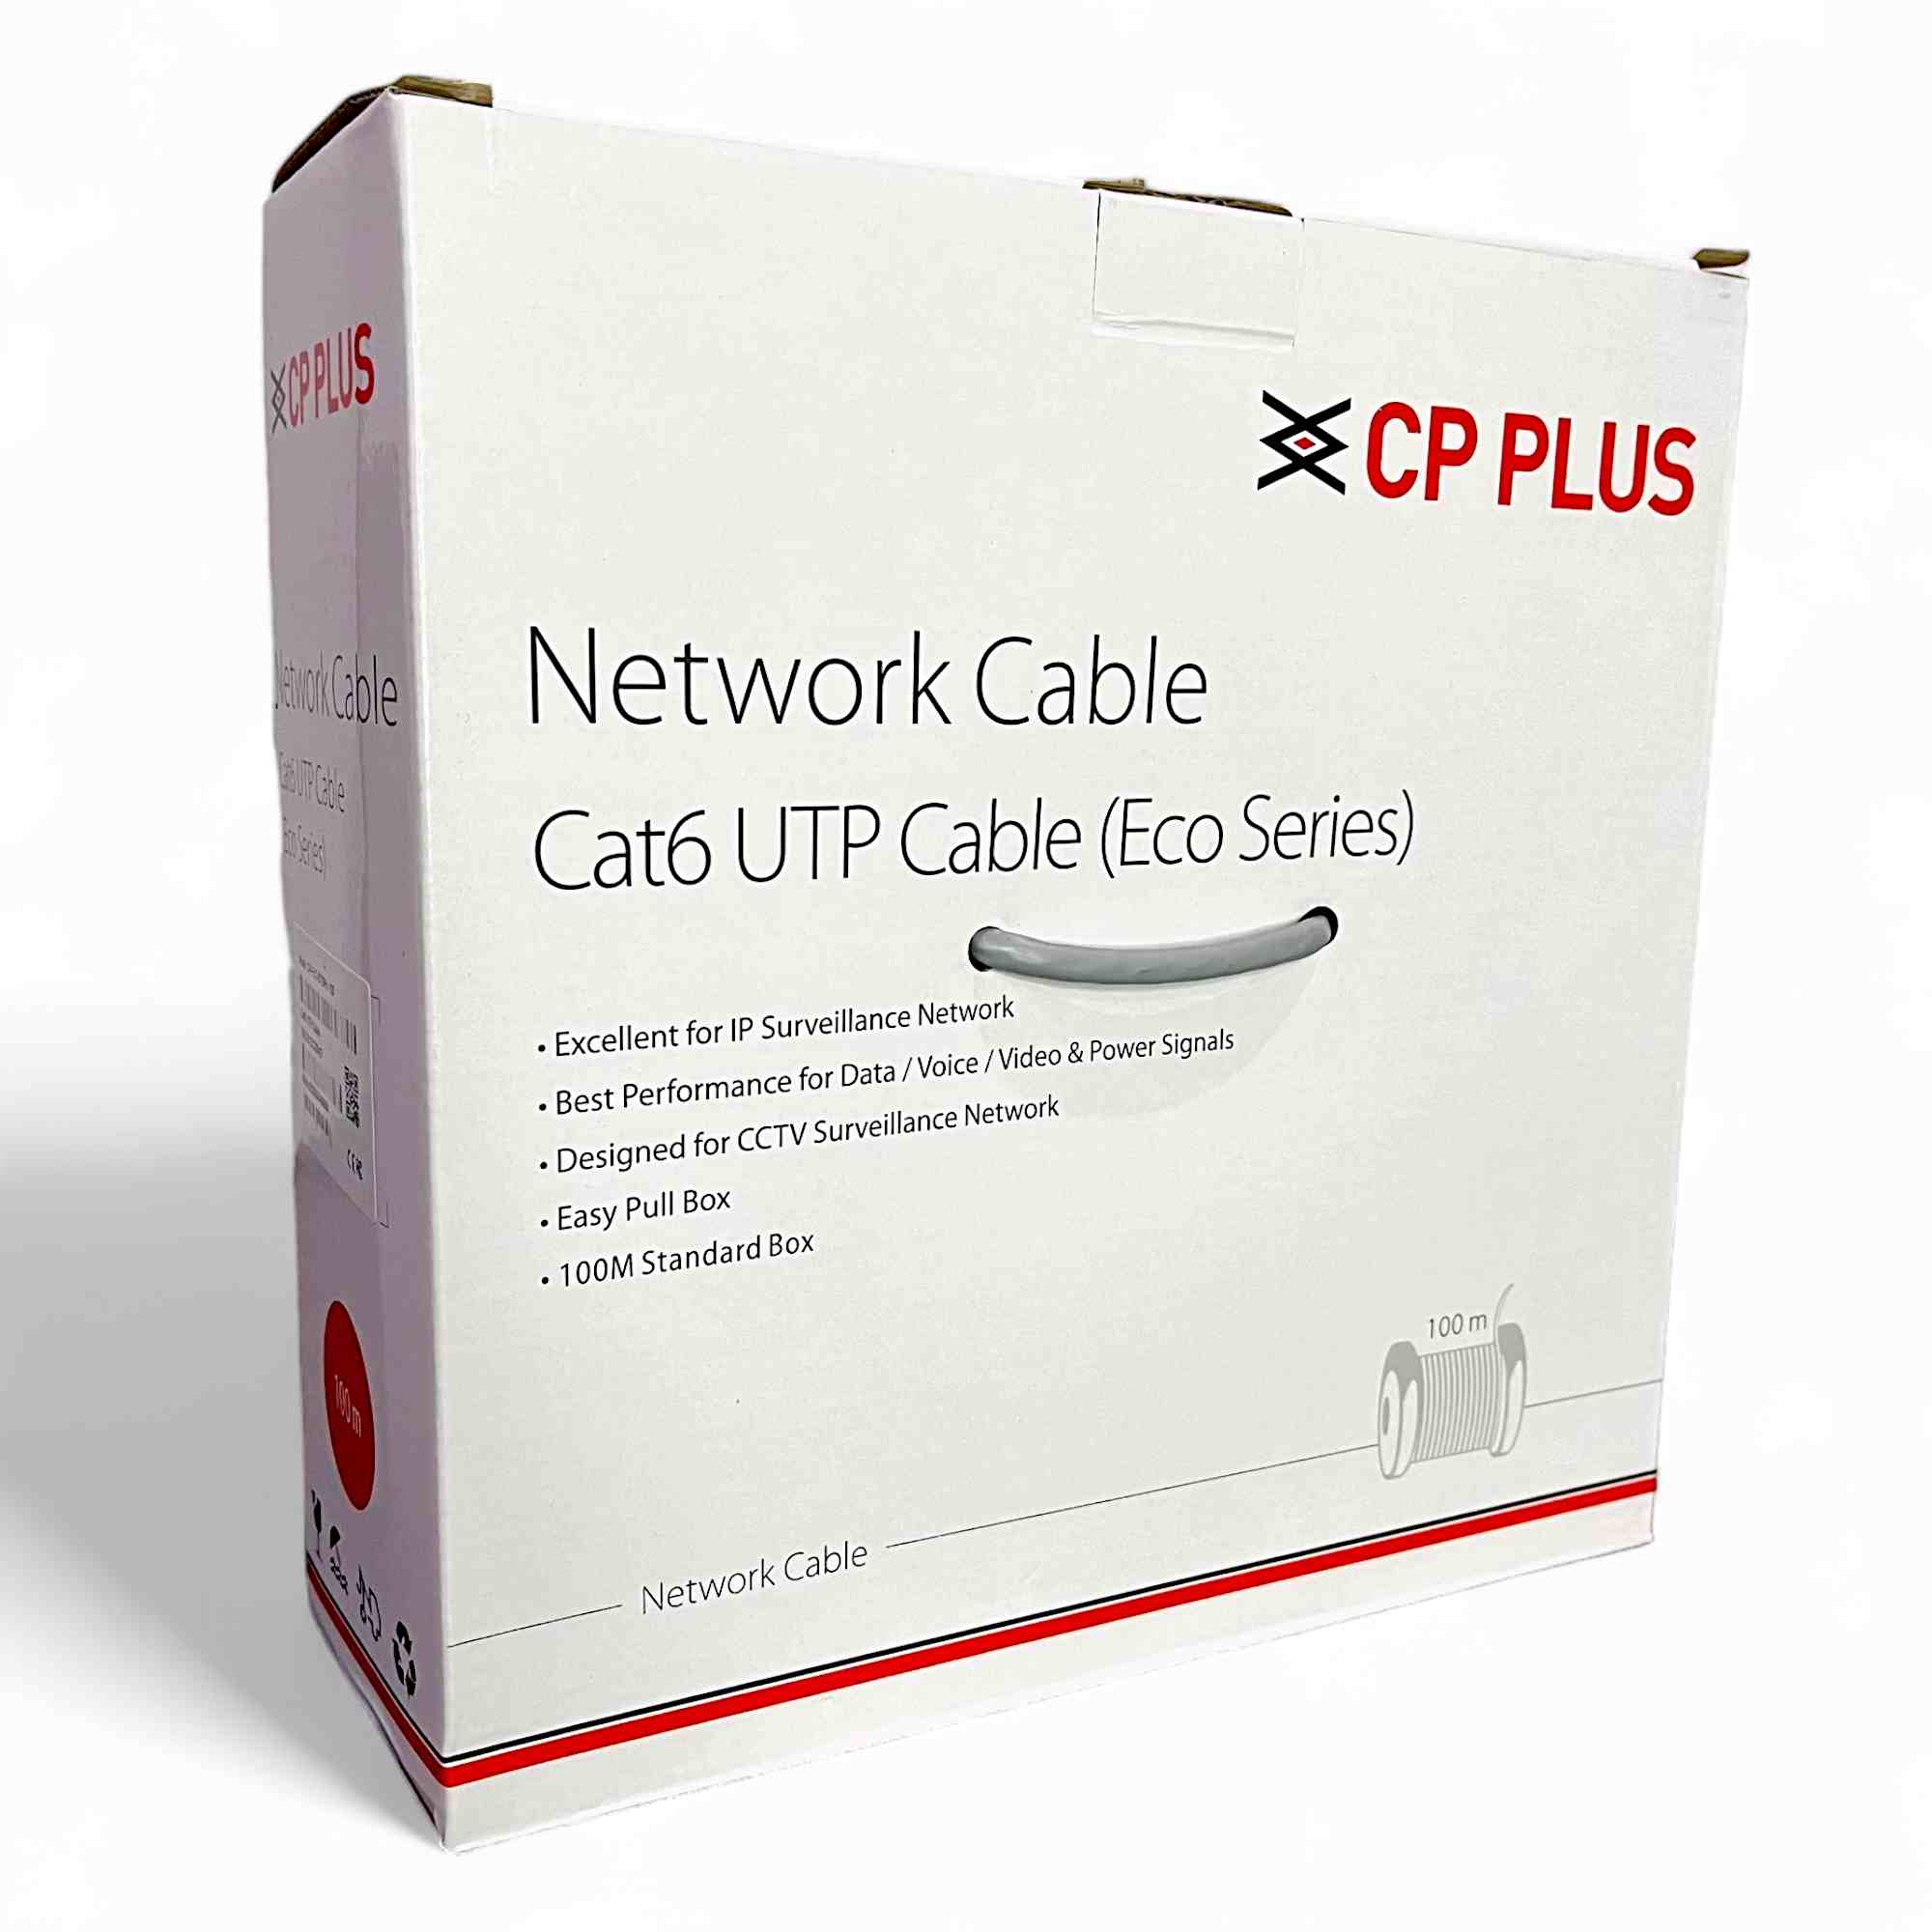 CP PLUS CP-FUT-6TSRH-100 Cat 6 Ethernet 100 meter Cable with high speed connectivity | Universal compatibility | Secure and Stable Connection | 24 AWG 4 Pair UTP Cable